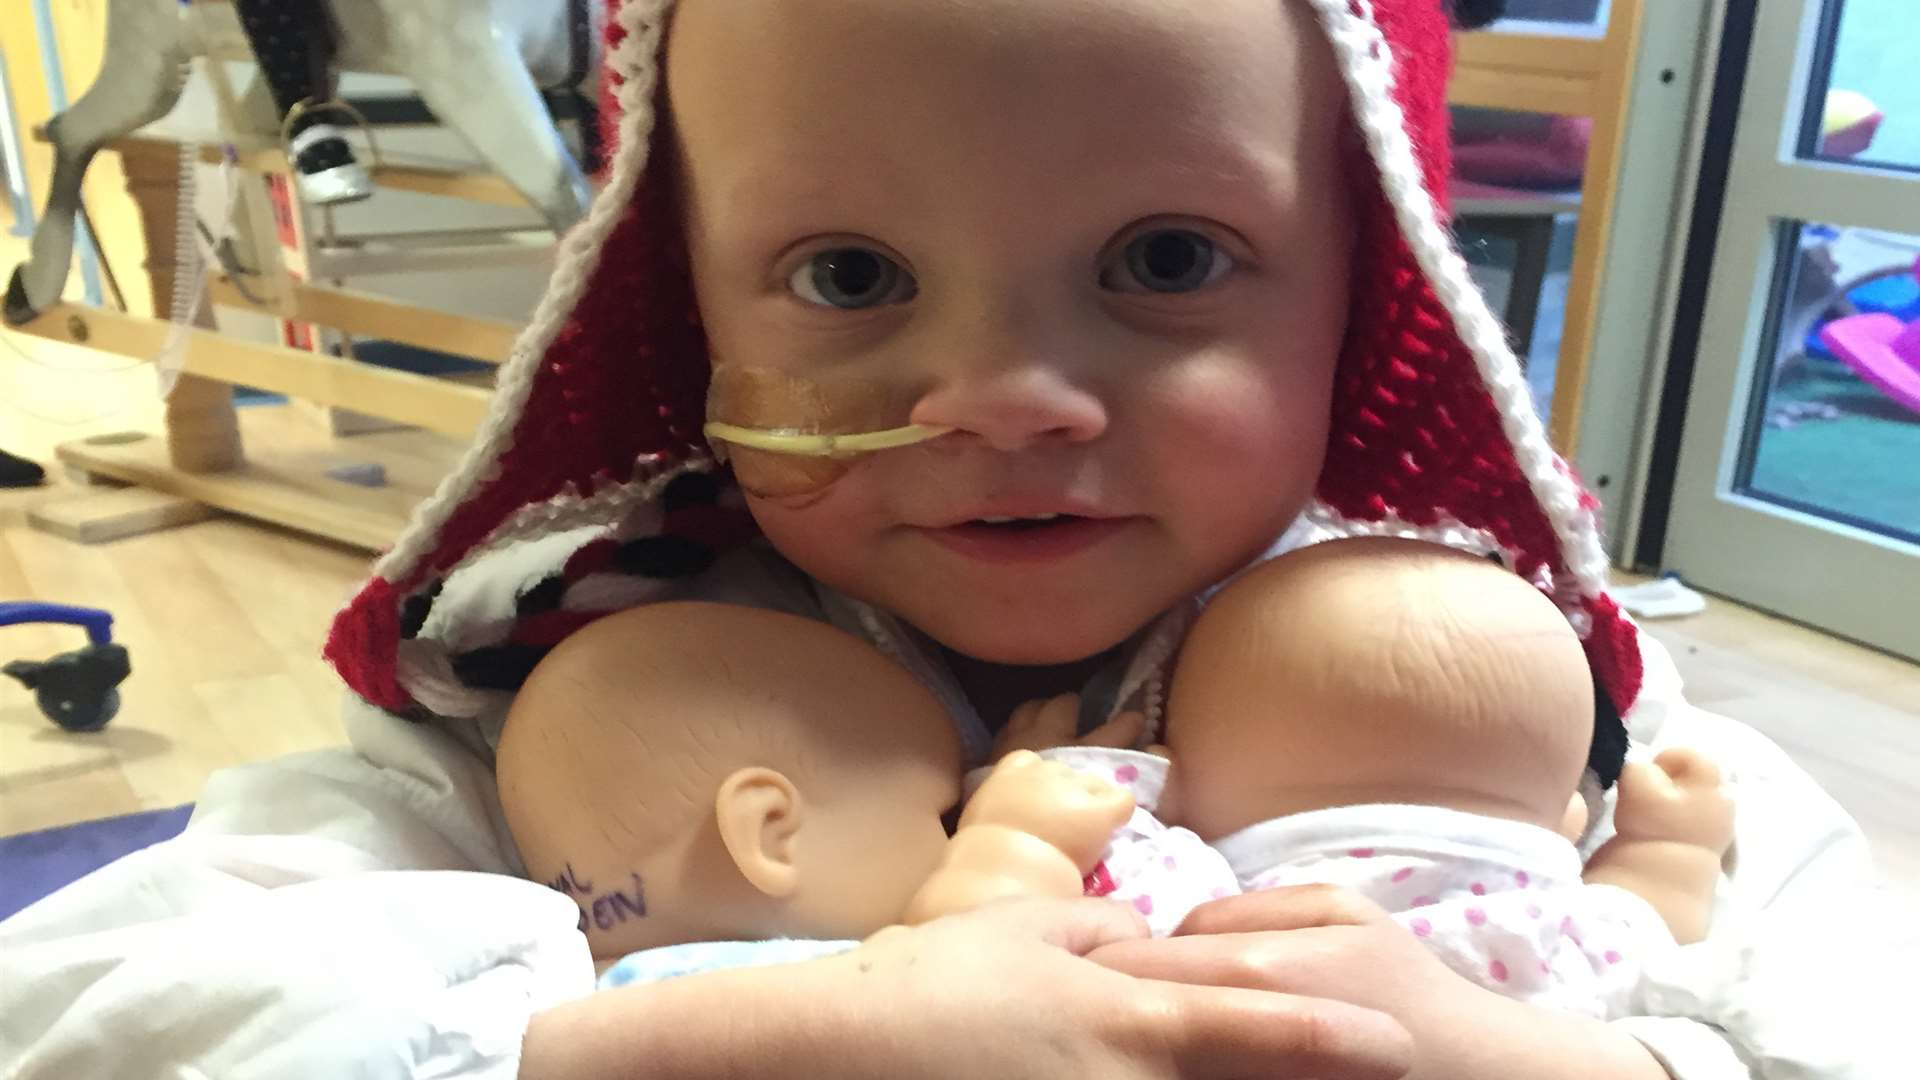 Ruby Young is fighting aggressive childhood cancer neuroblastoma